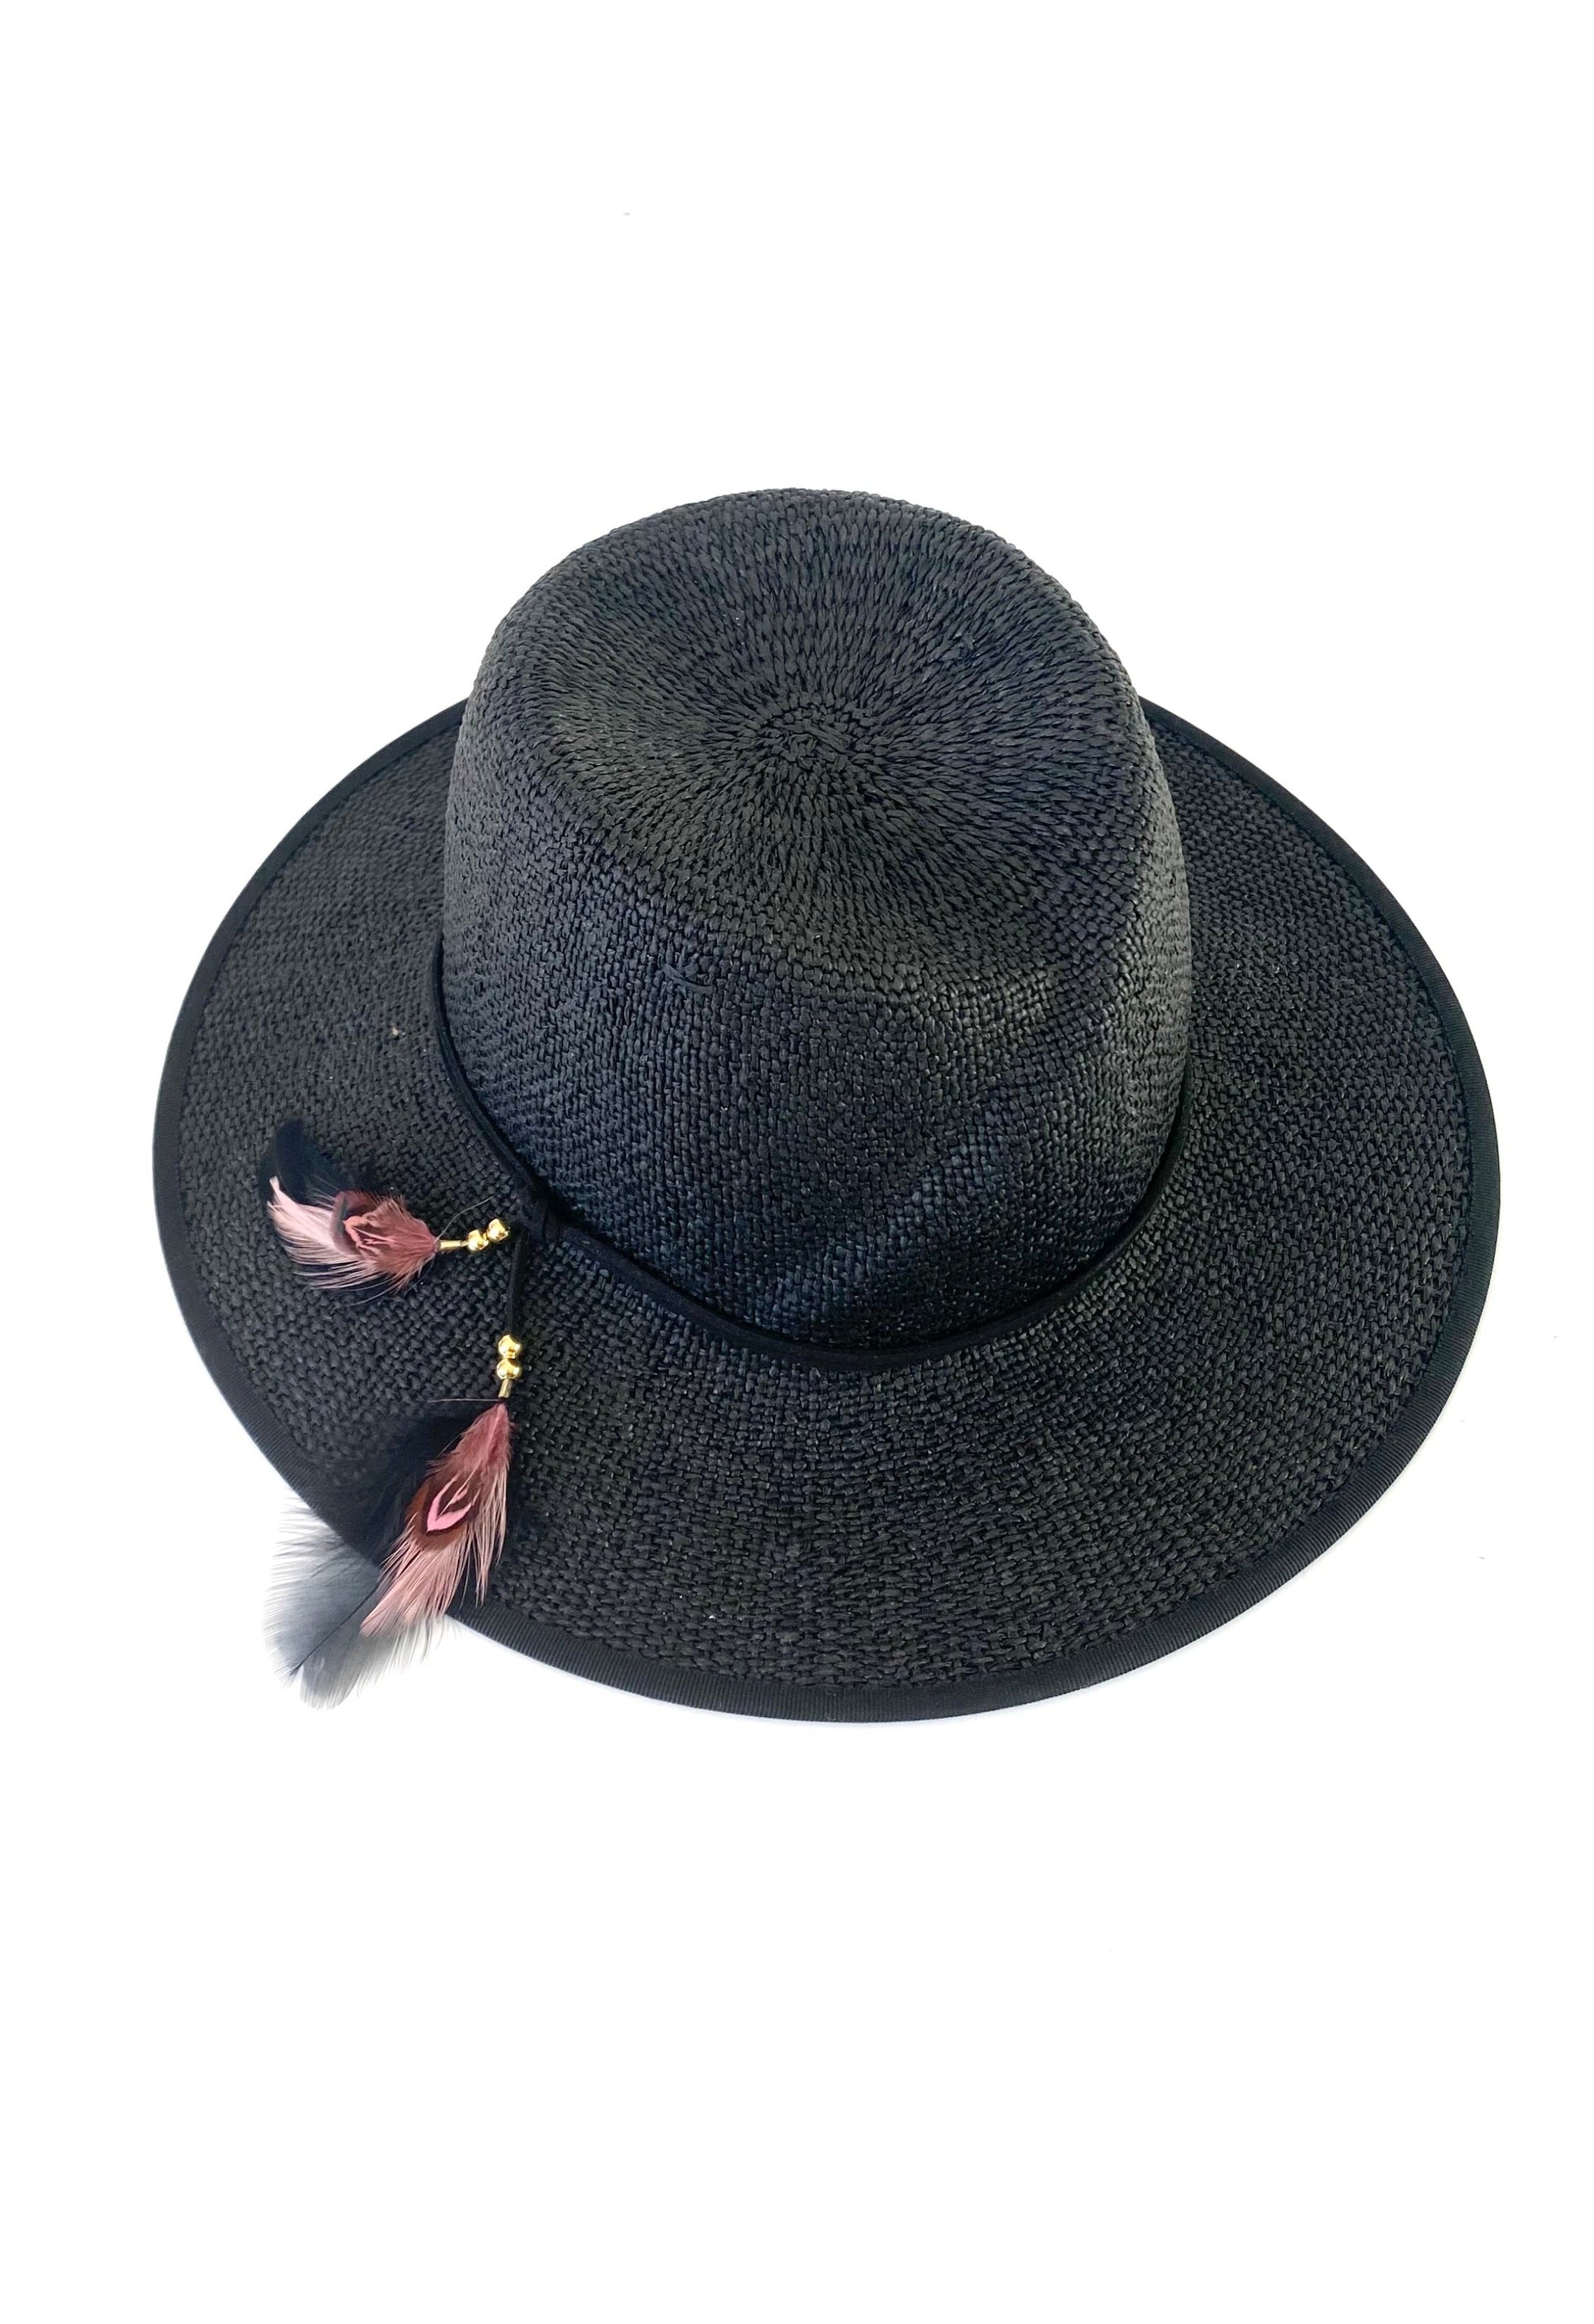 boho black straw hat with slanted crown fedora with feather tassels